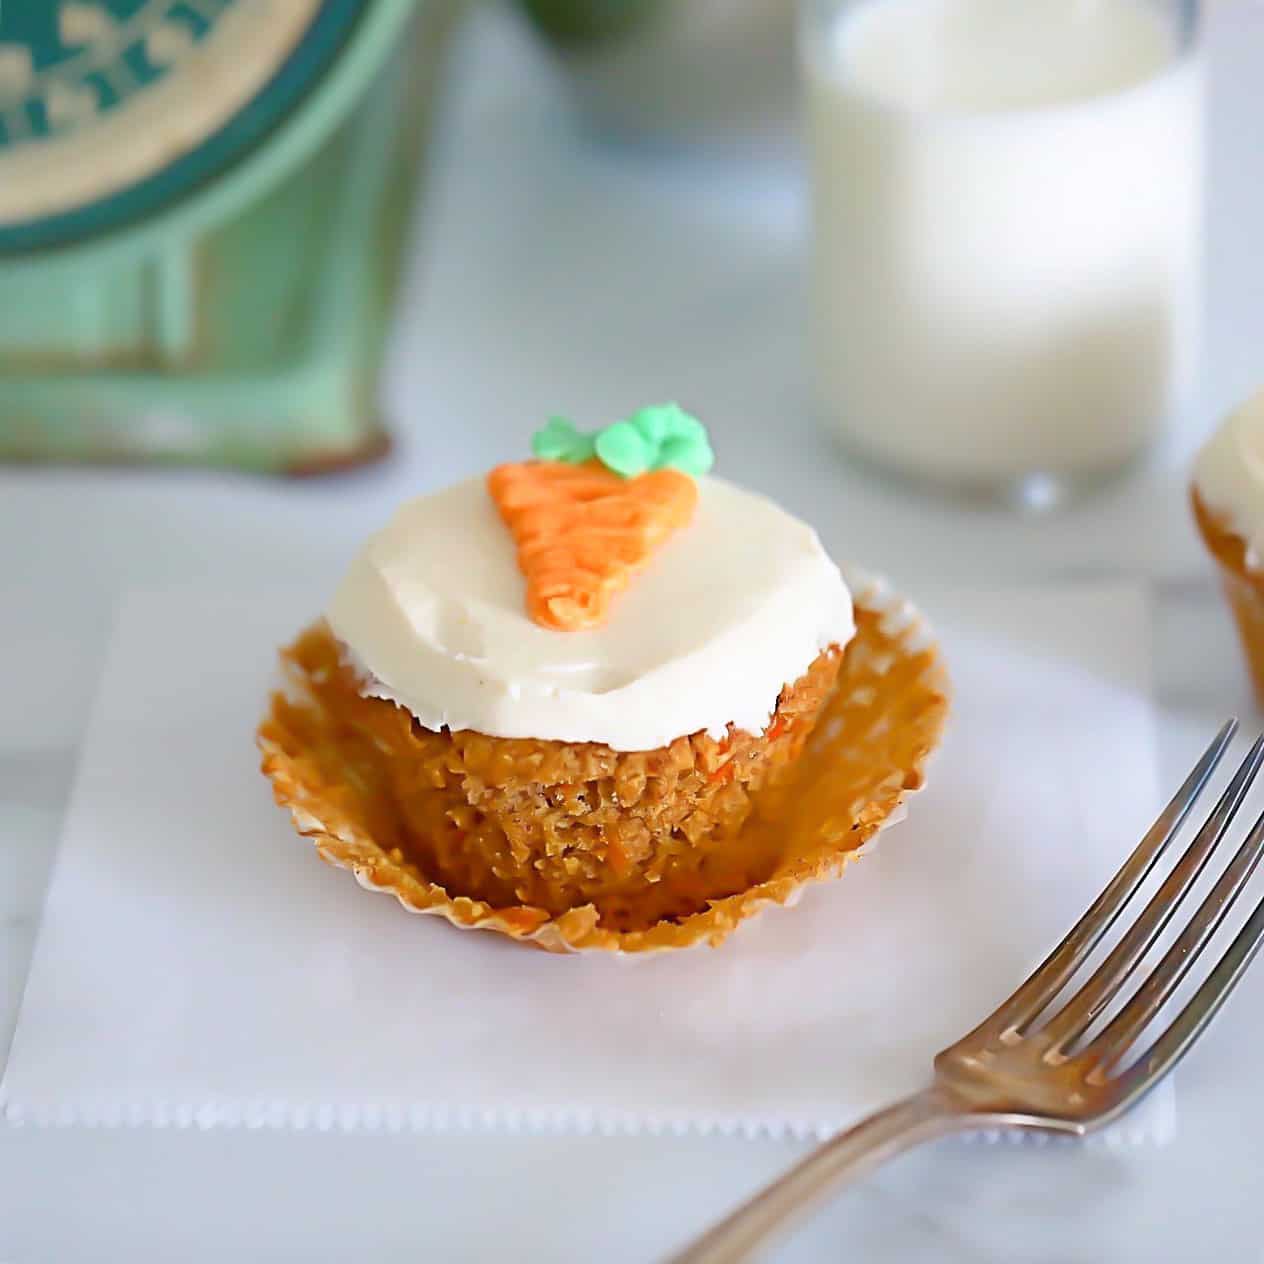 Keto Muffin with carrot